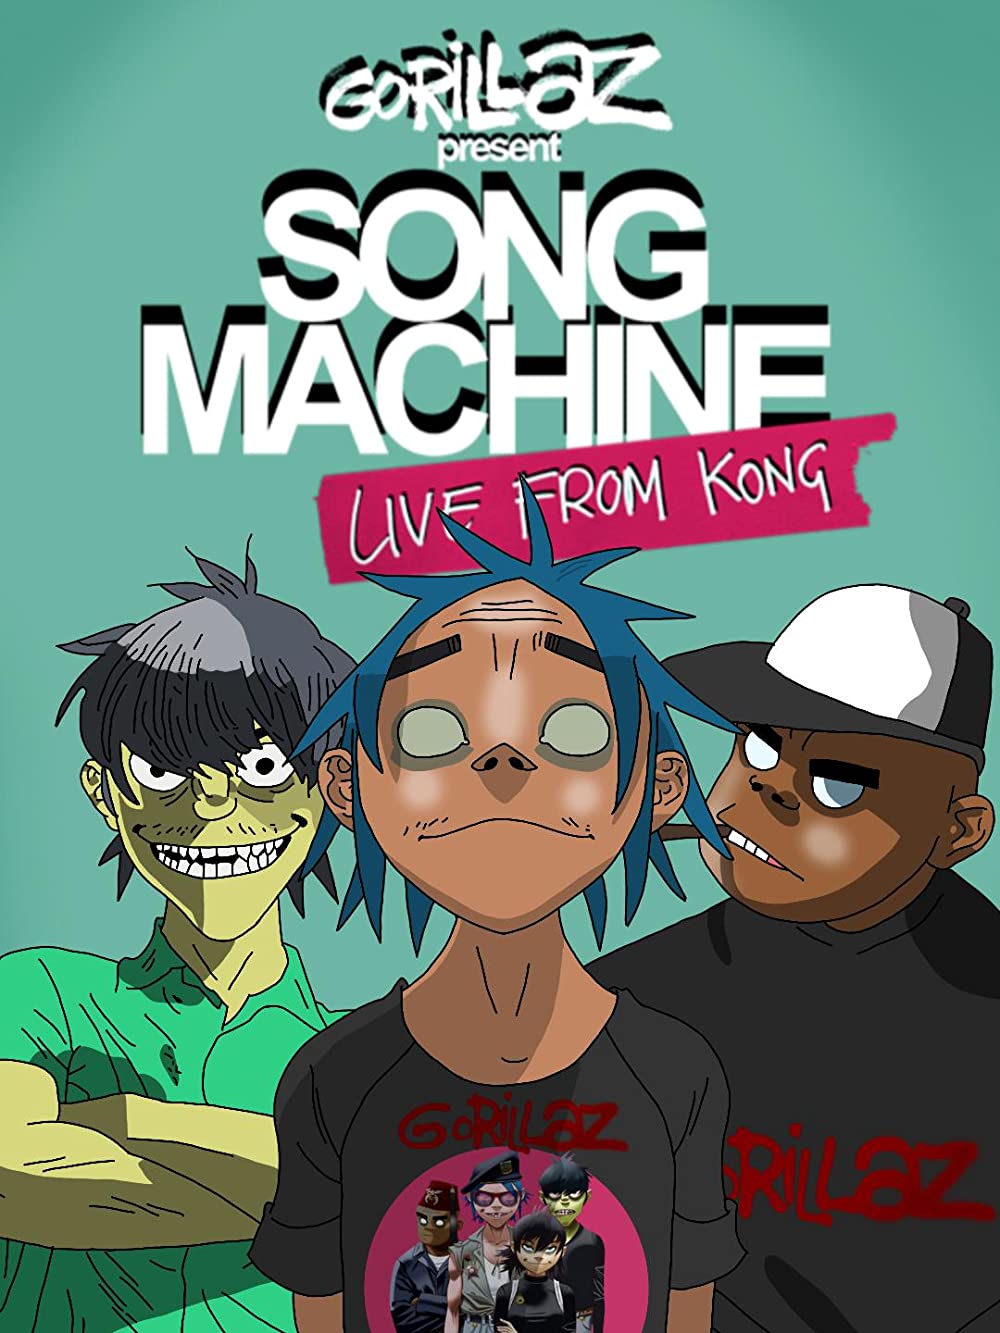 Gorillaz: Song Machine Live from Kong (OV)